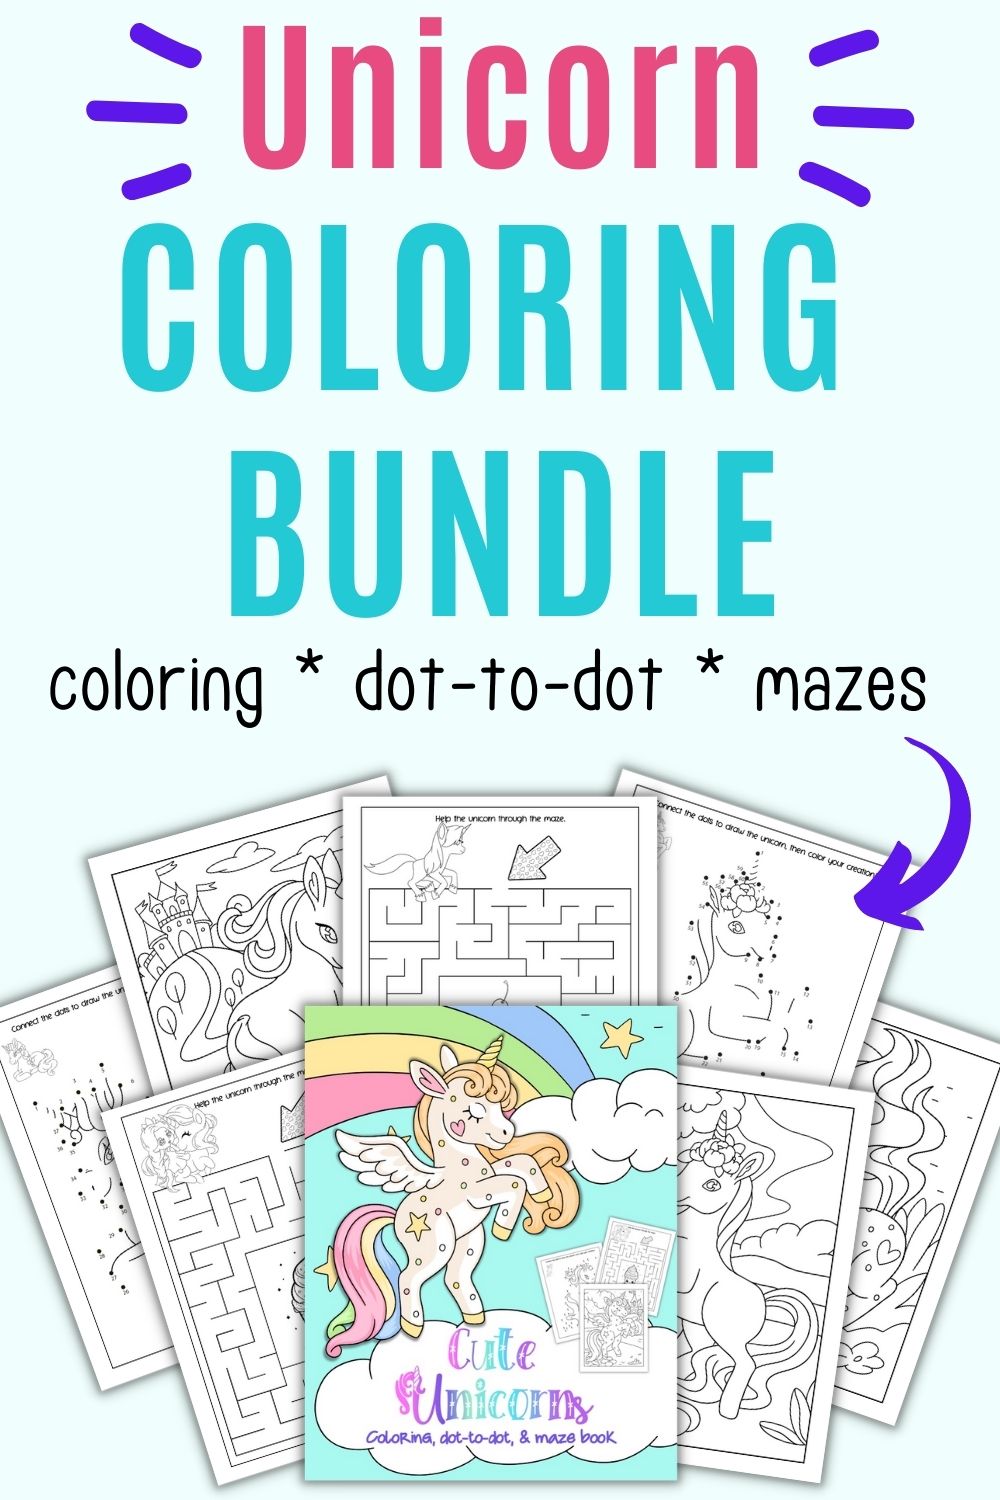 a mockup of a unicorn coloring bundle with coloring pages, dot to dot, and mazes